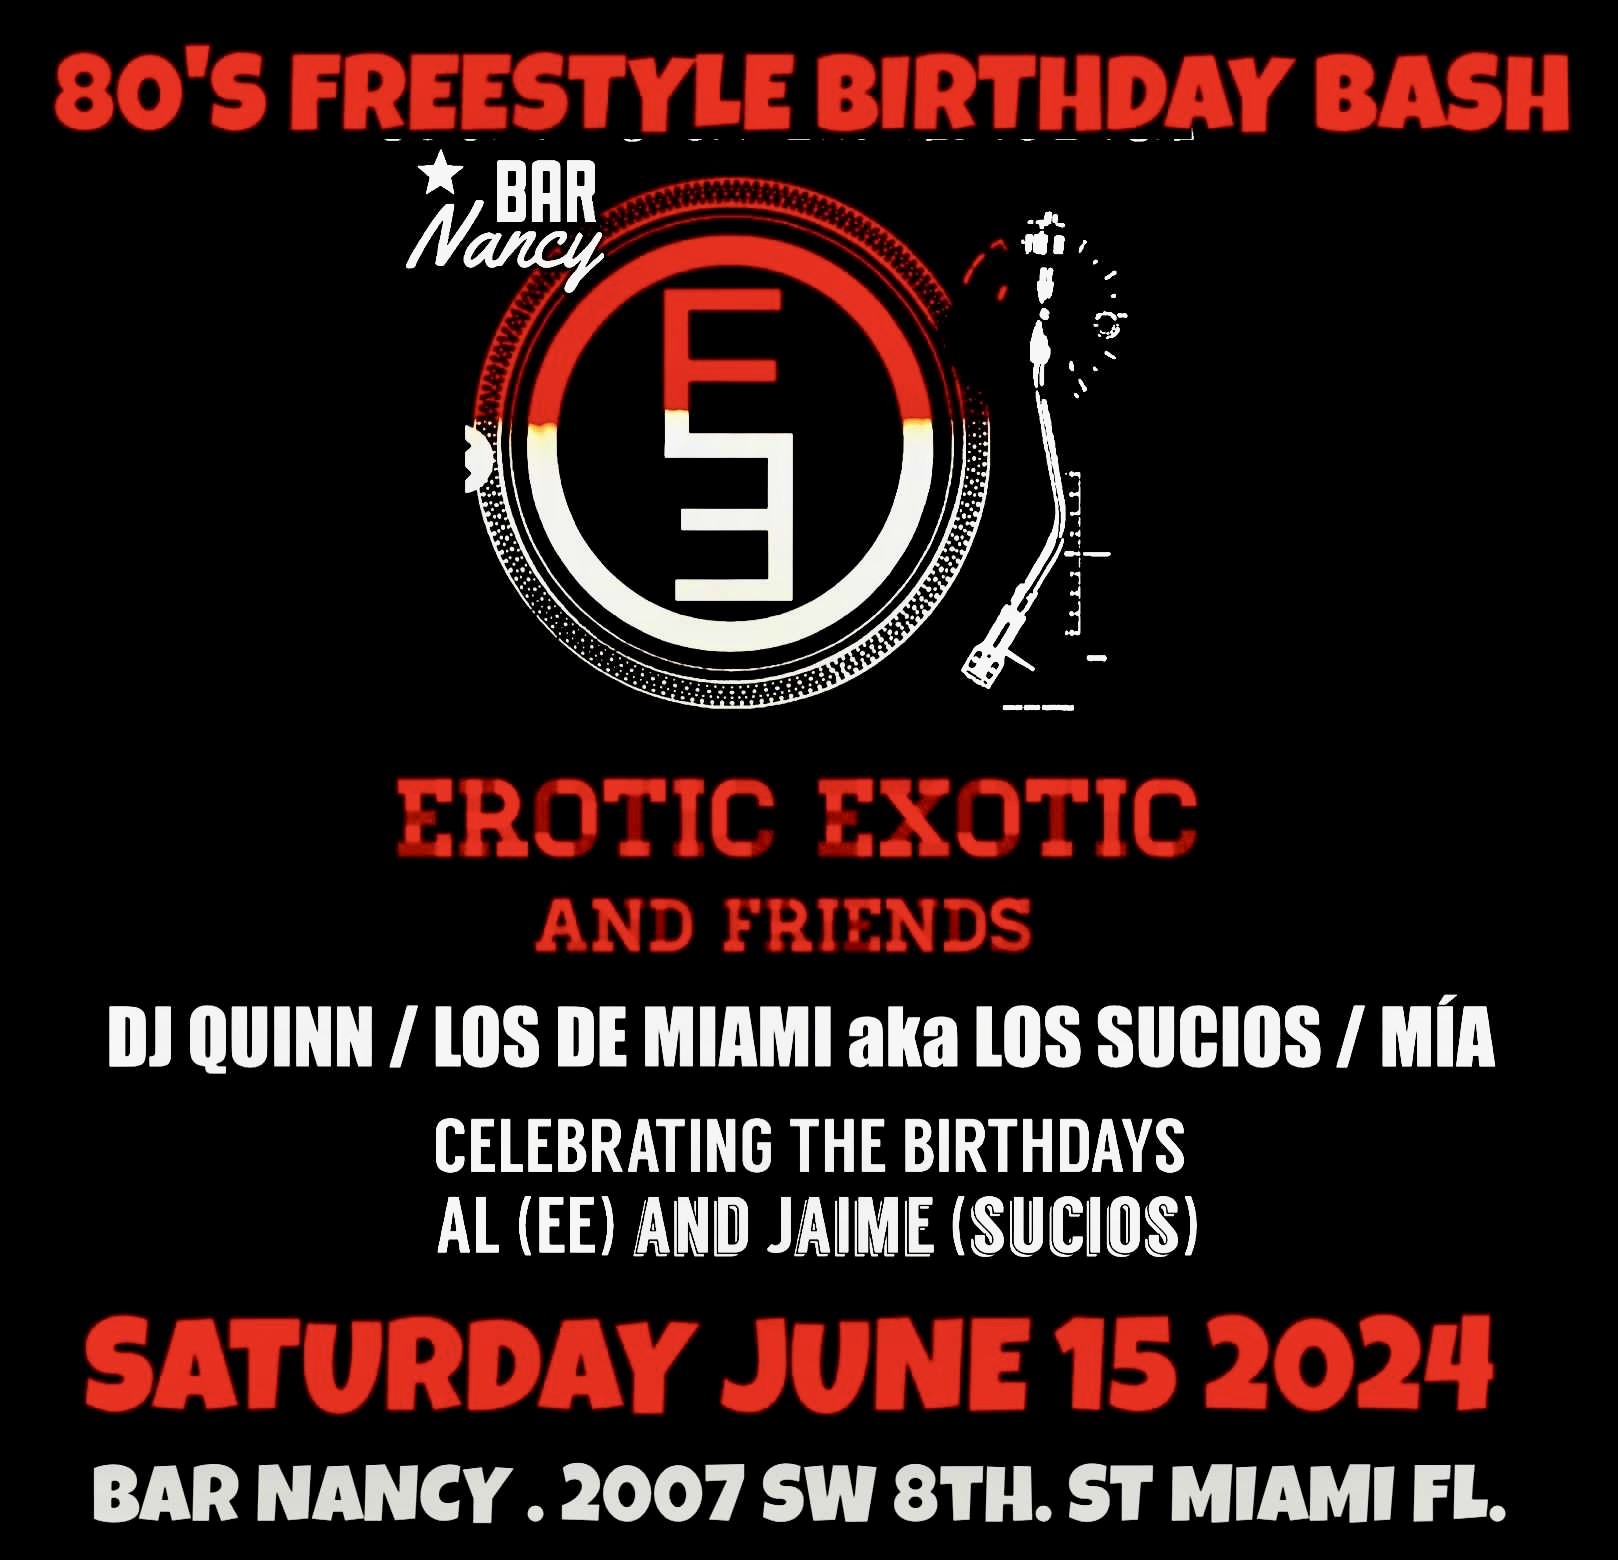 8O'S FREESTYLE BIRTHDAY BASH - EROTIC EXOTIC AND FRIENDS AT BAR NANCY